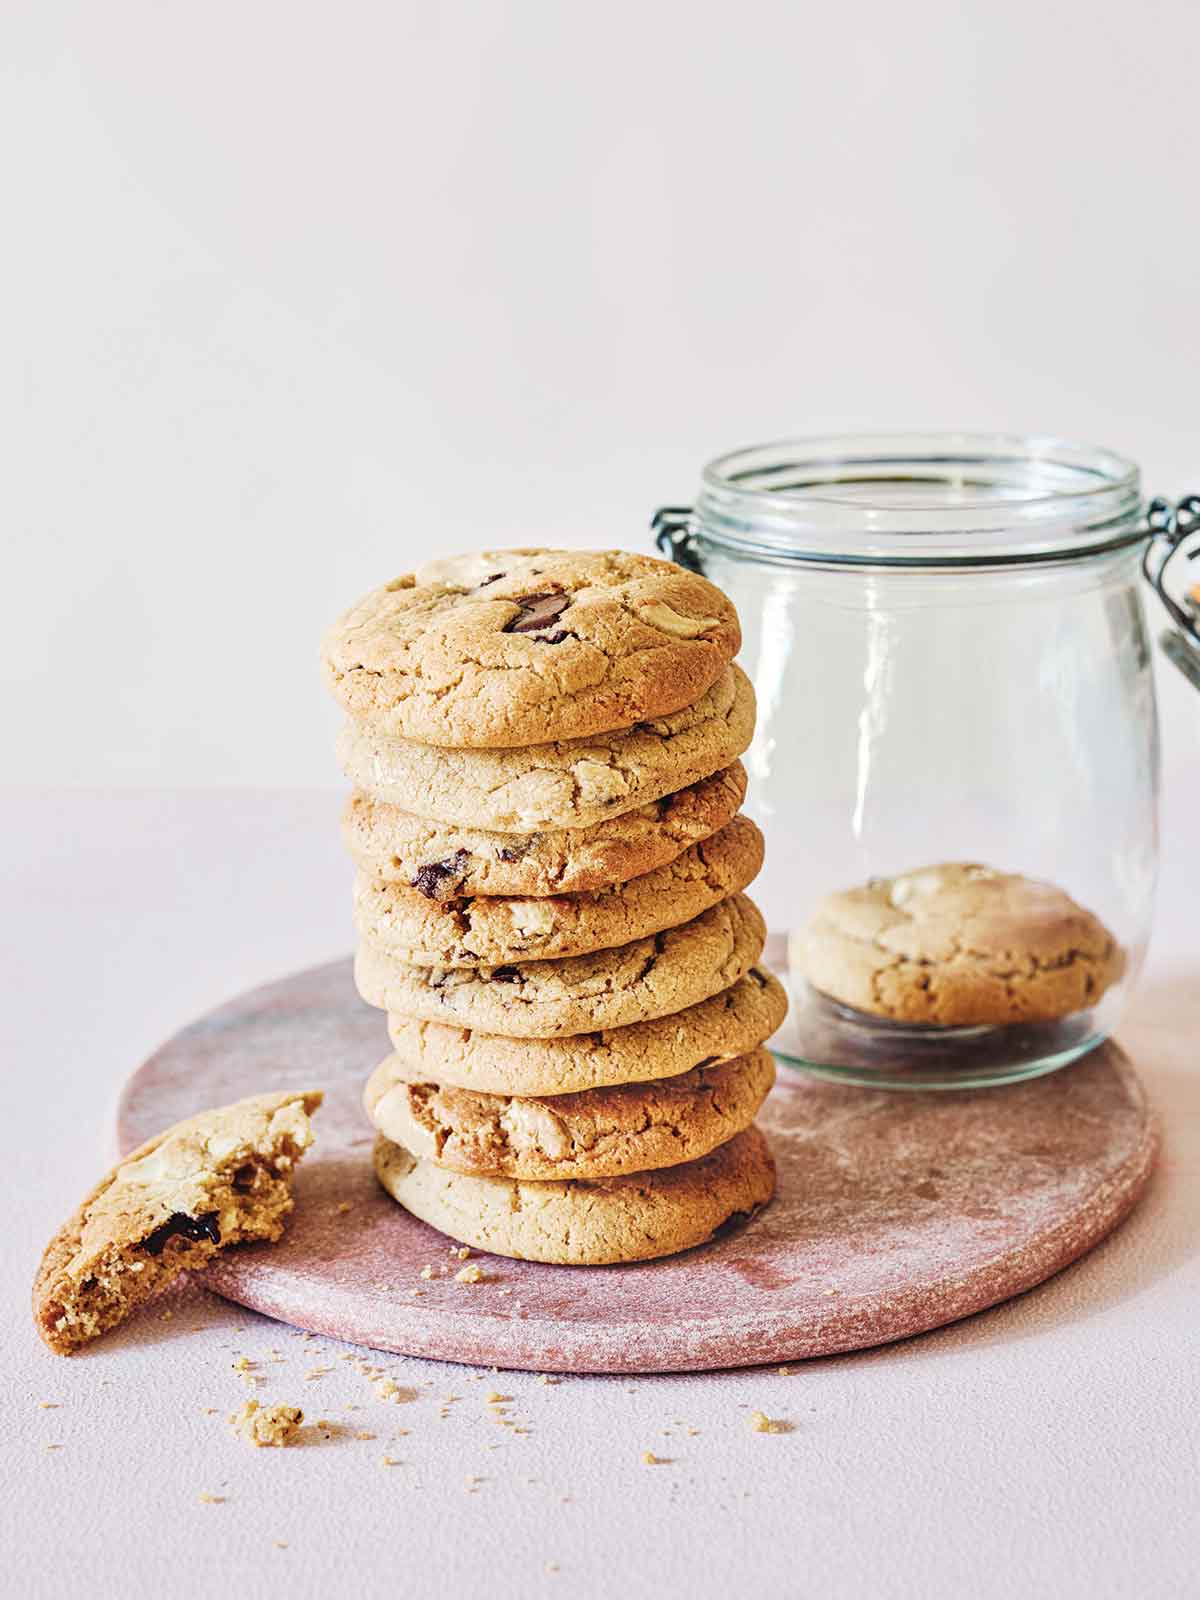 A wooden plate with a stack of salted tahini chocolate cookies, with a cookie jar and a partially eaten cookie.